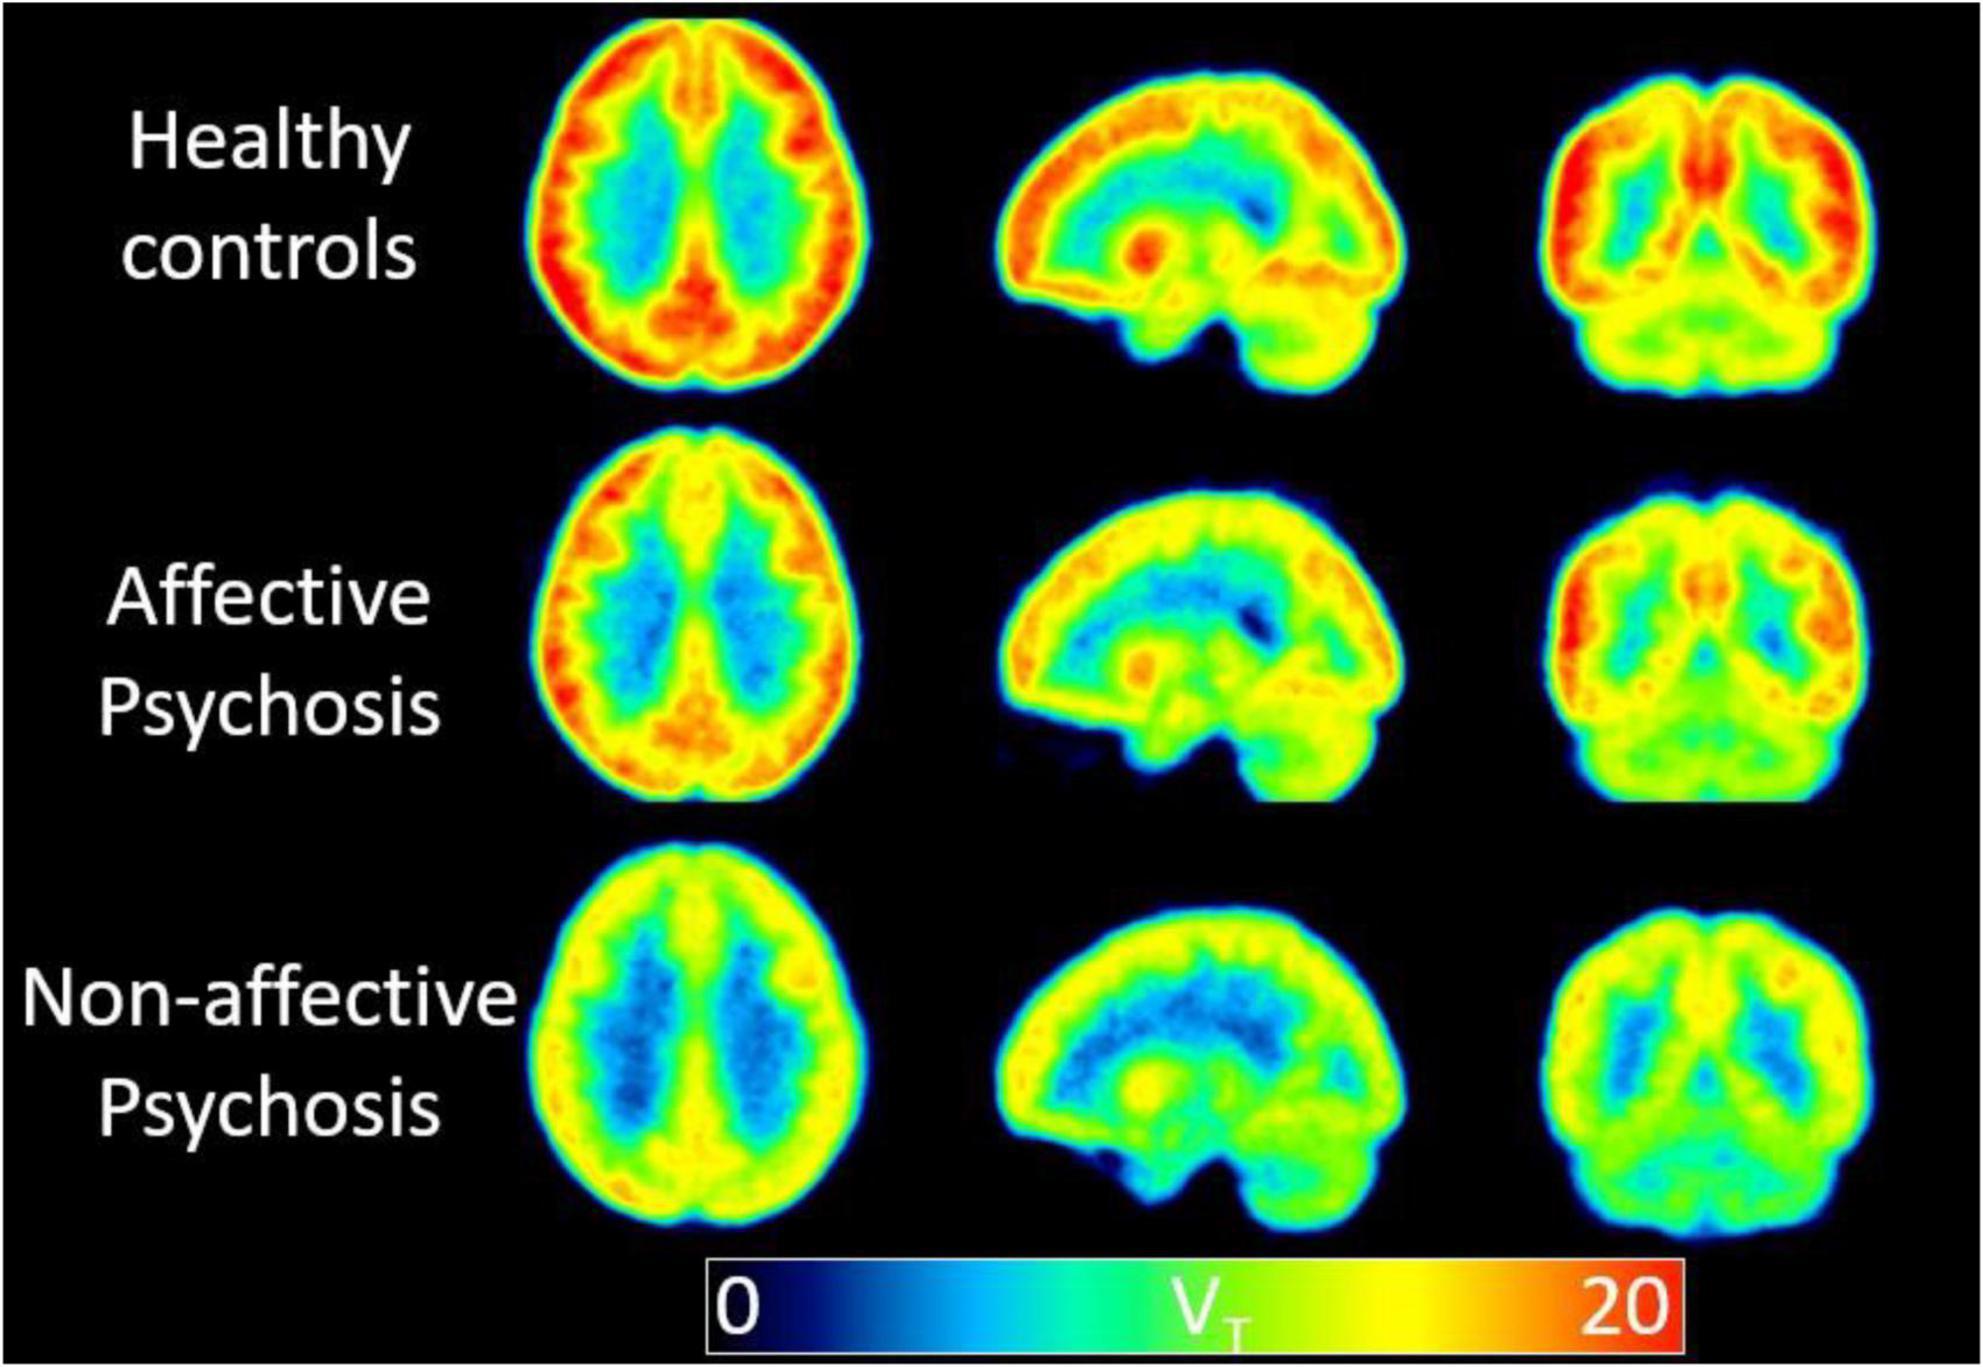 Frontiers Neuroimaging in schizophrenia A review article